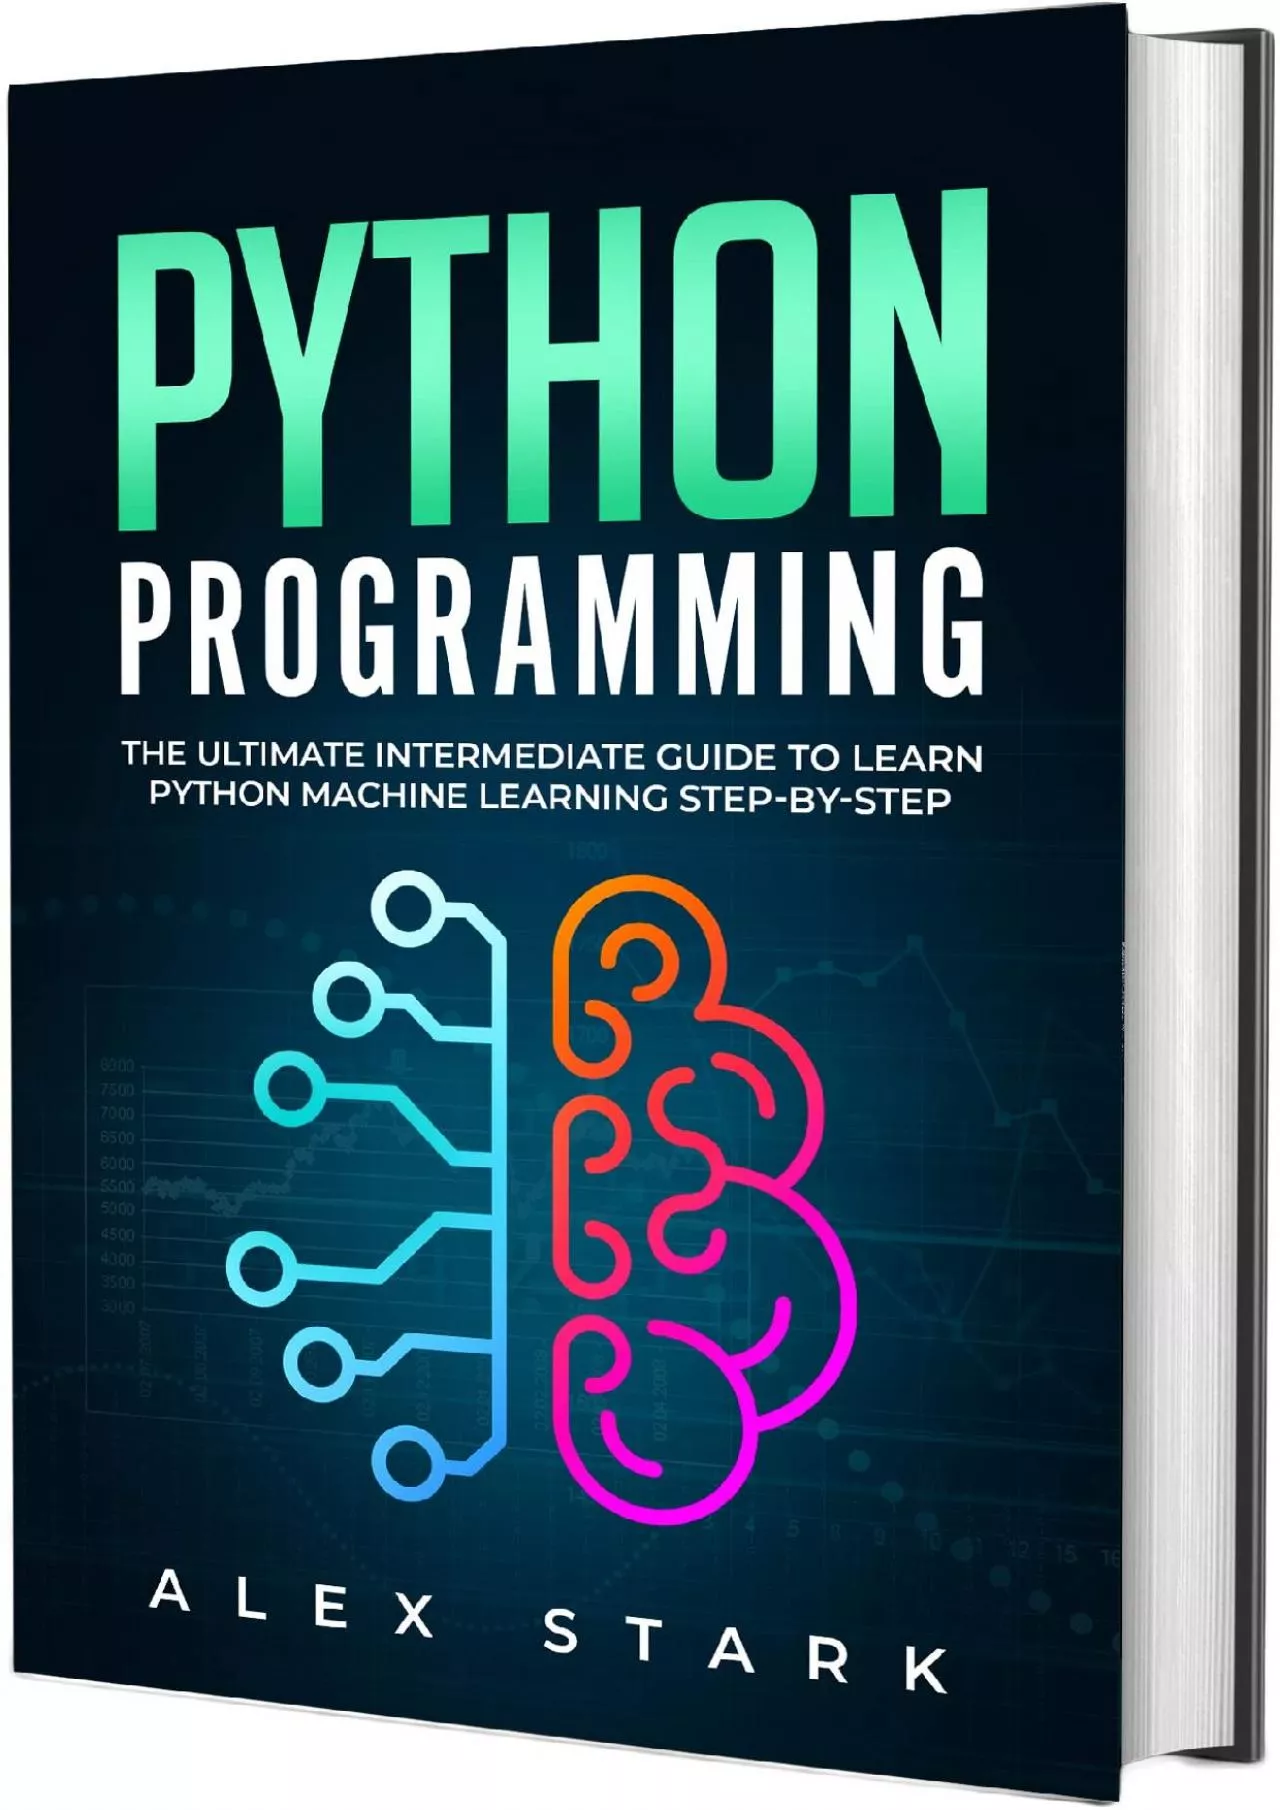 [DOWLOAD]-Python Programming: The Ultimate Intermediate Guide to Learn Python Machine